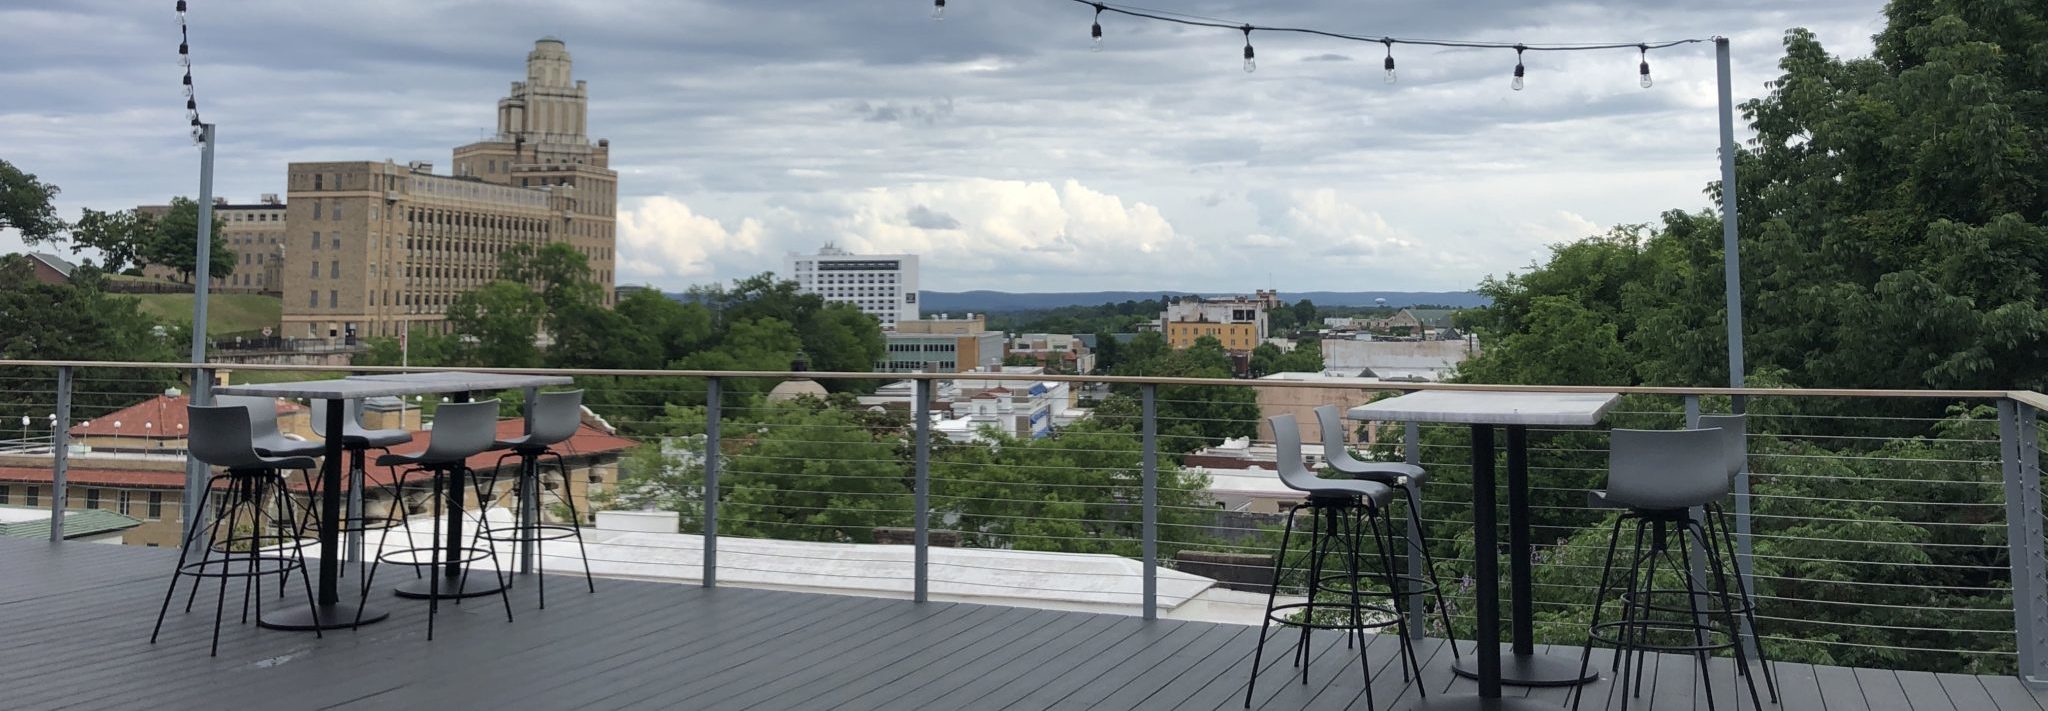 First Look Little Rock Hotel Opens Rooftop Bar With Downtown Views